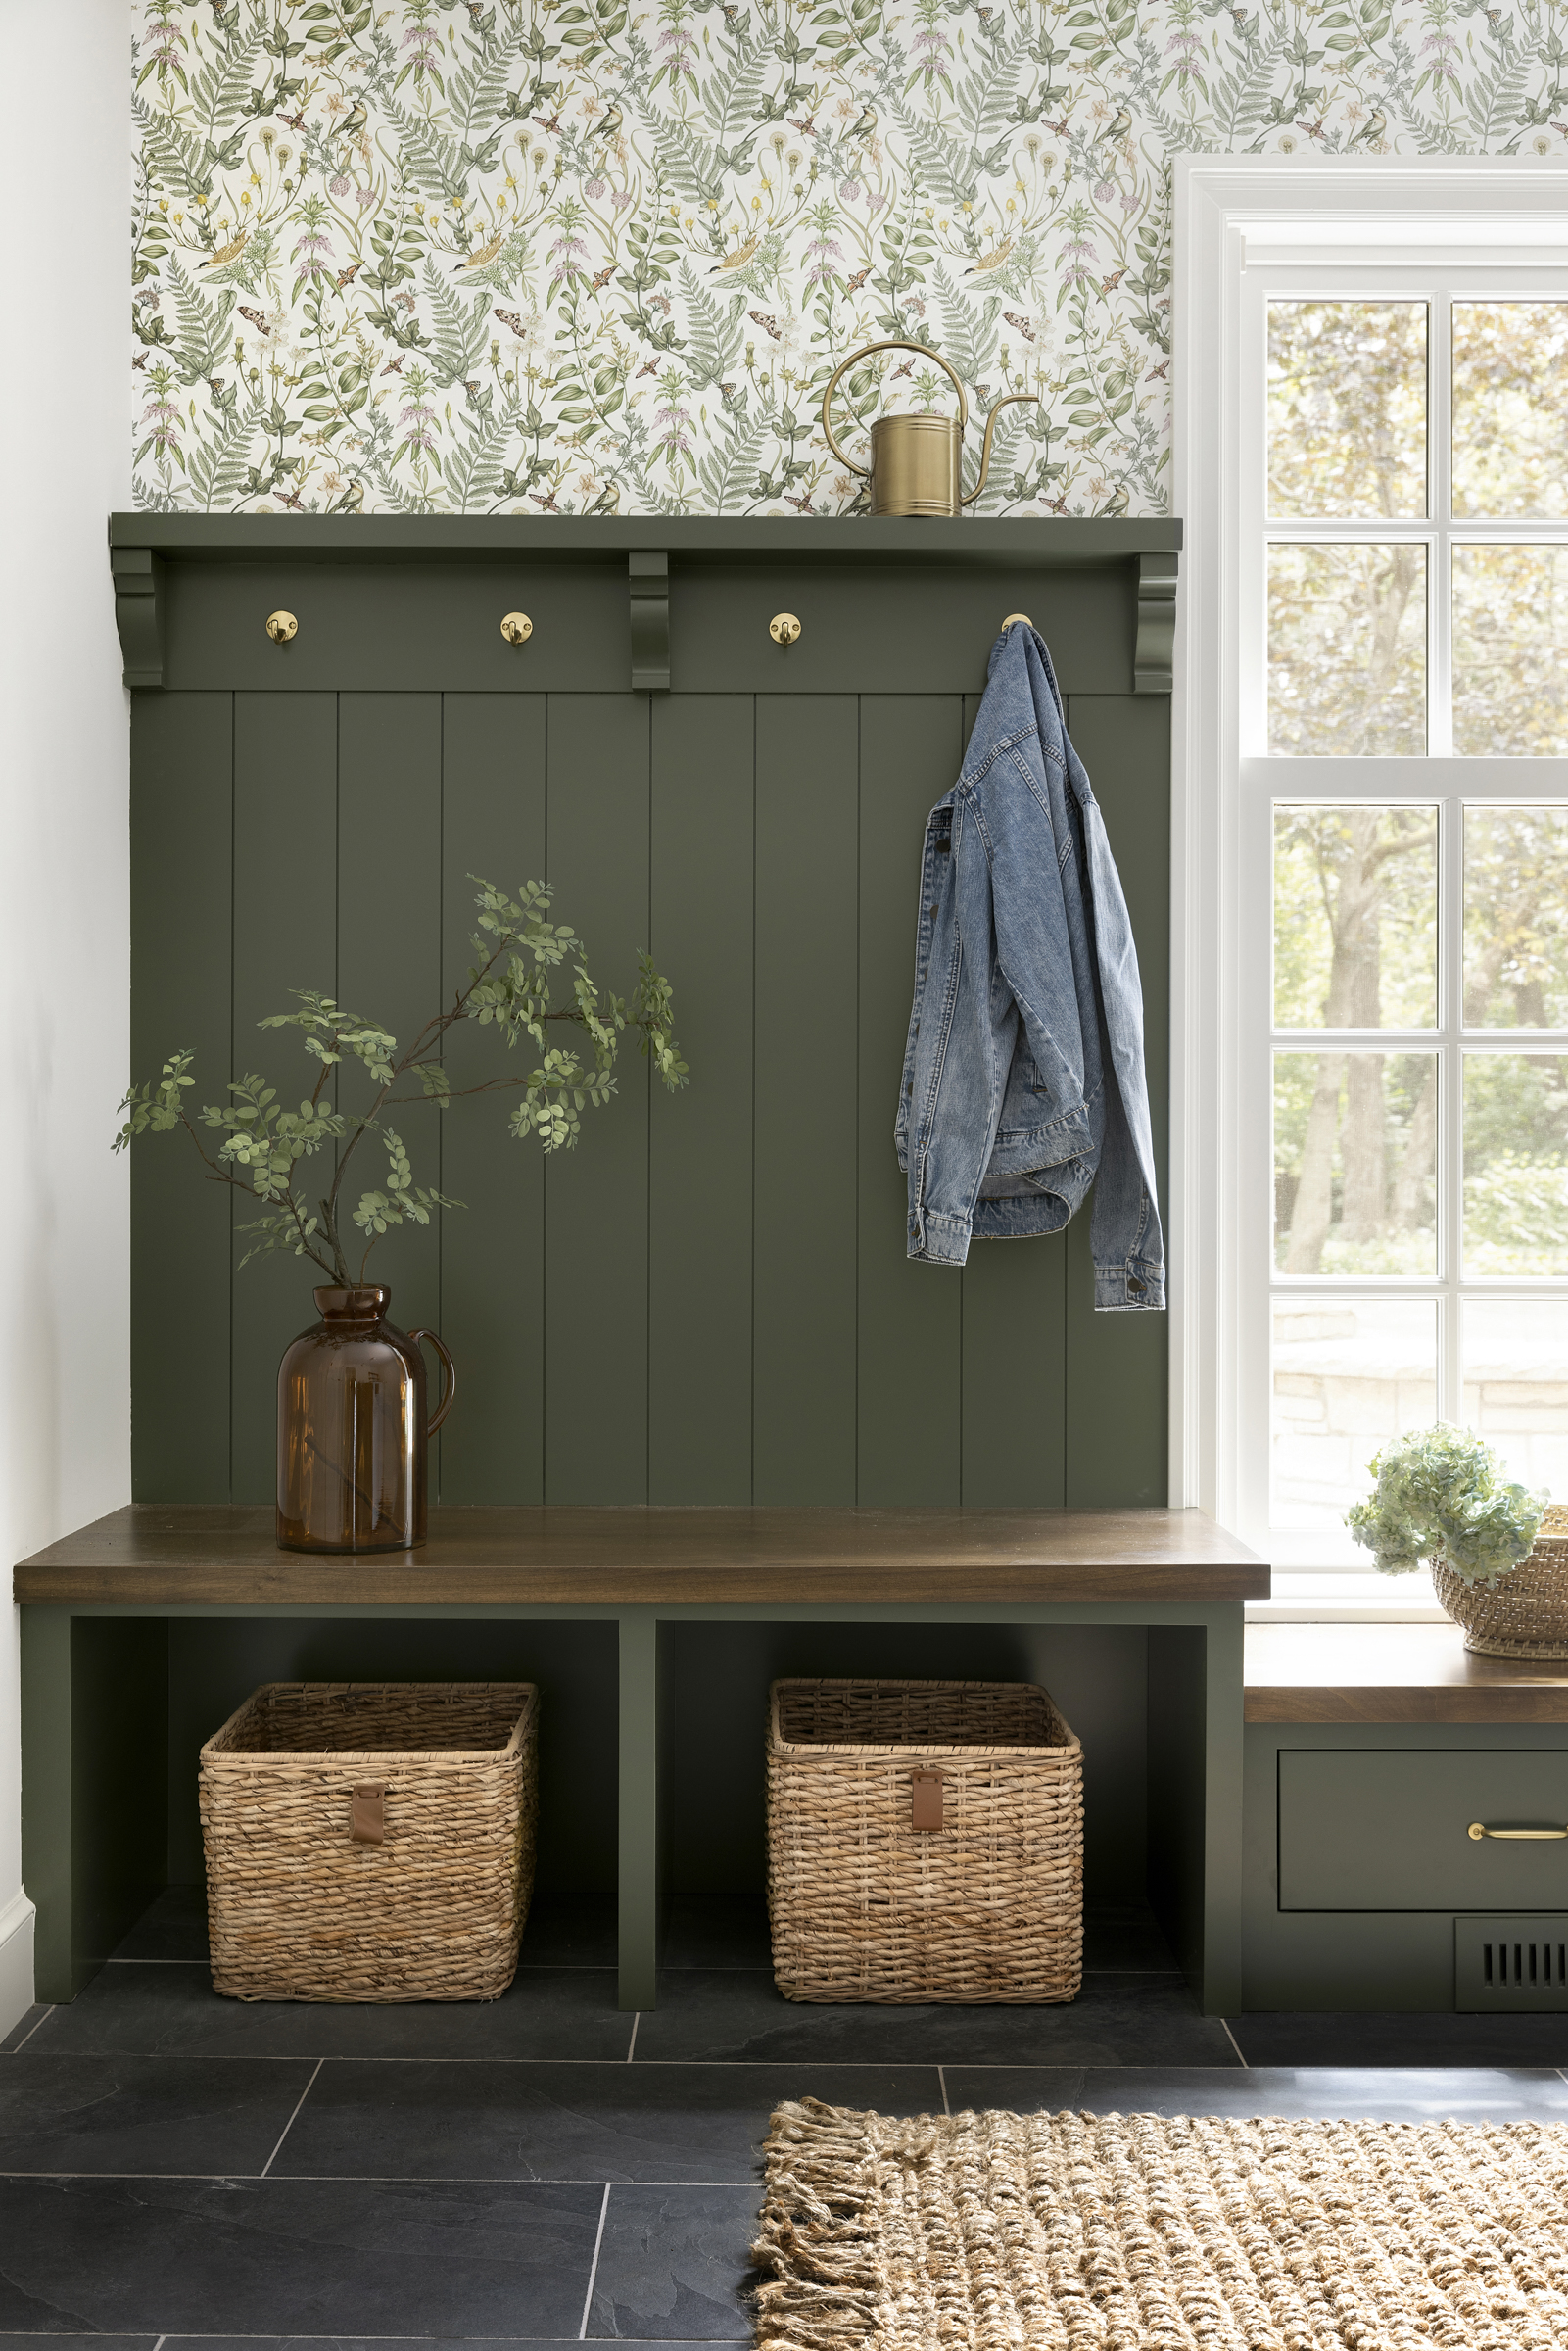 Painted green mudroom cabinetry, whimsical wallpaper and aged brass hardware.